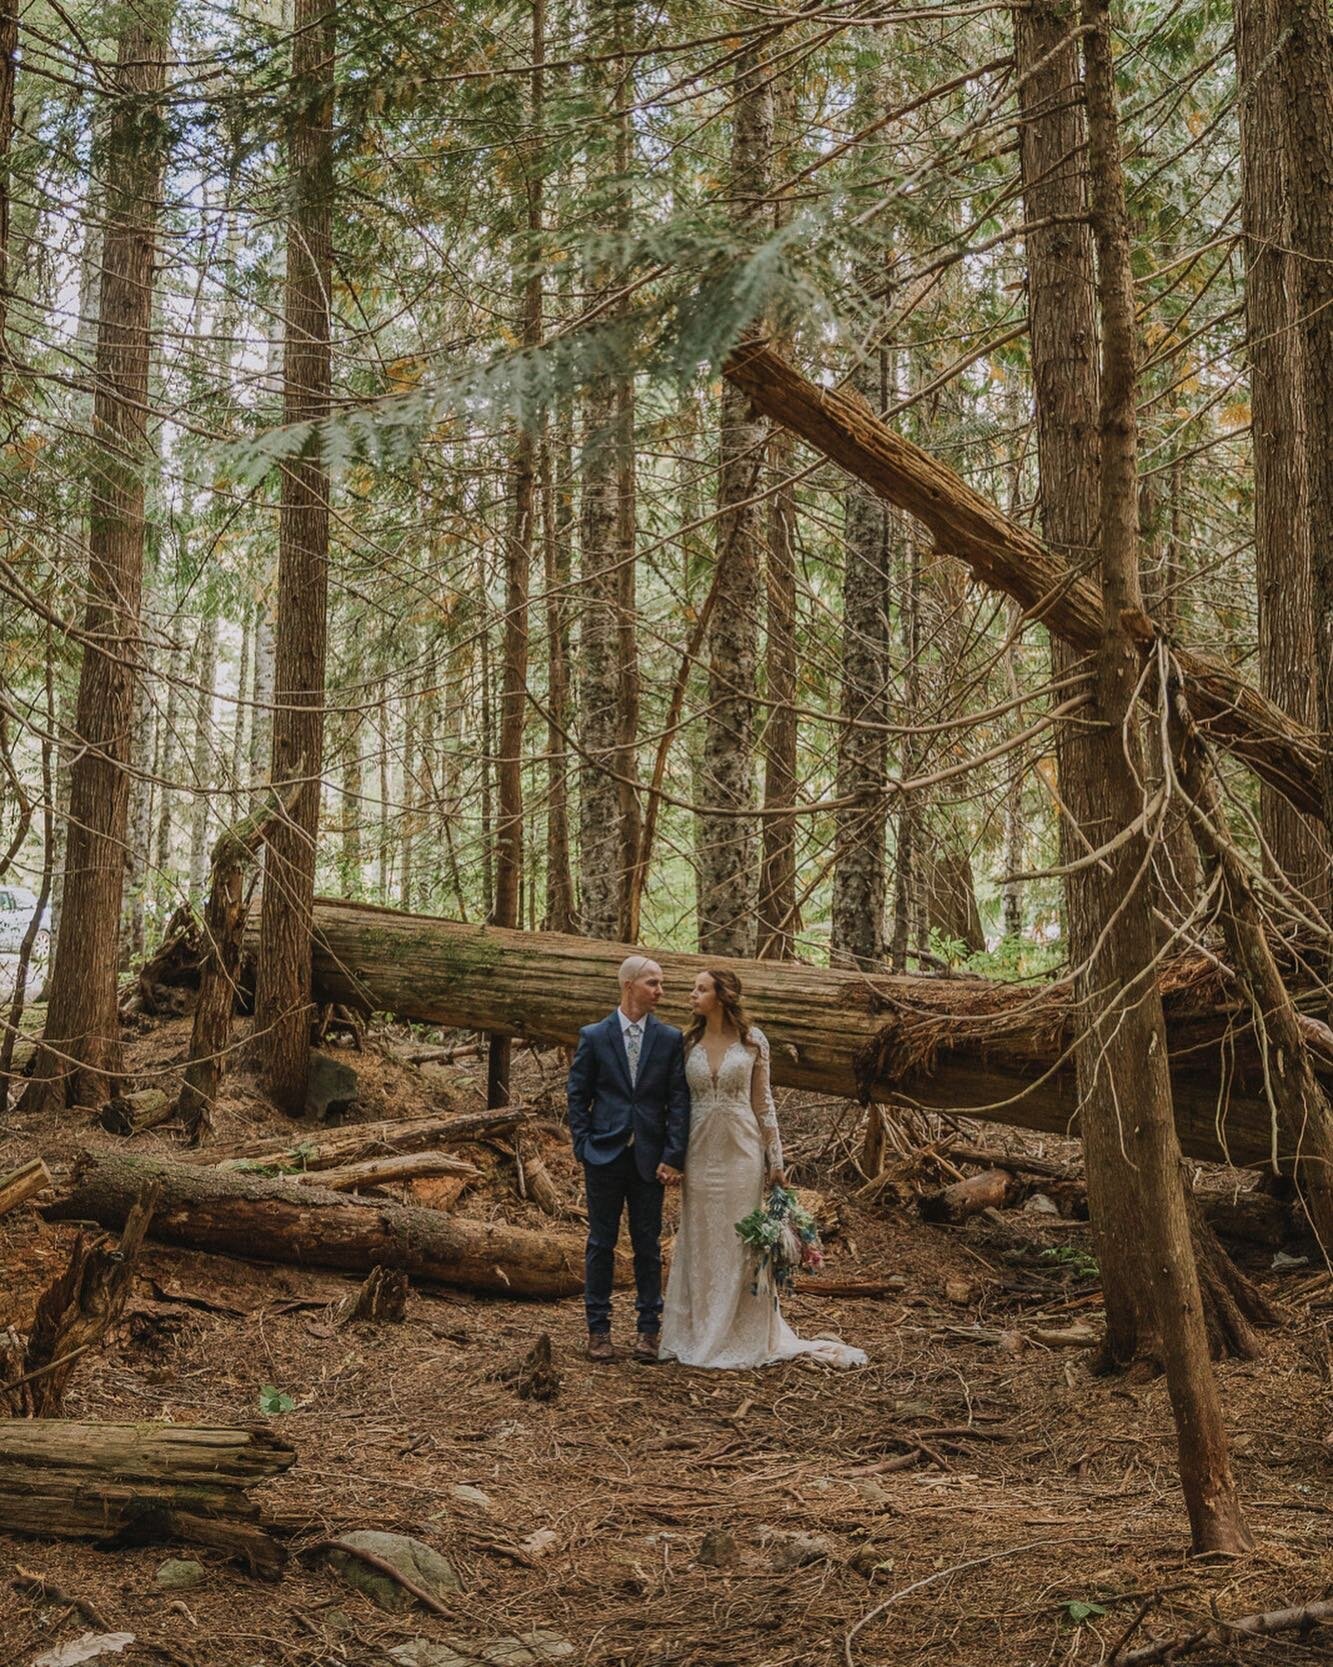 More Oregon elopements please 🌿 I think about this weekend on a regular basis and can&rsquo;t wait to return one day! Madi &amp; Drew did their wedding exactly how they wanted and I couldn&rsquo;t have imagined it any other way.